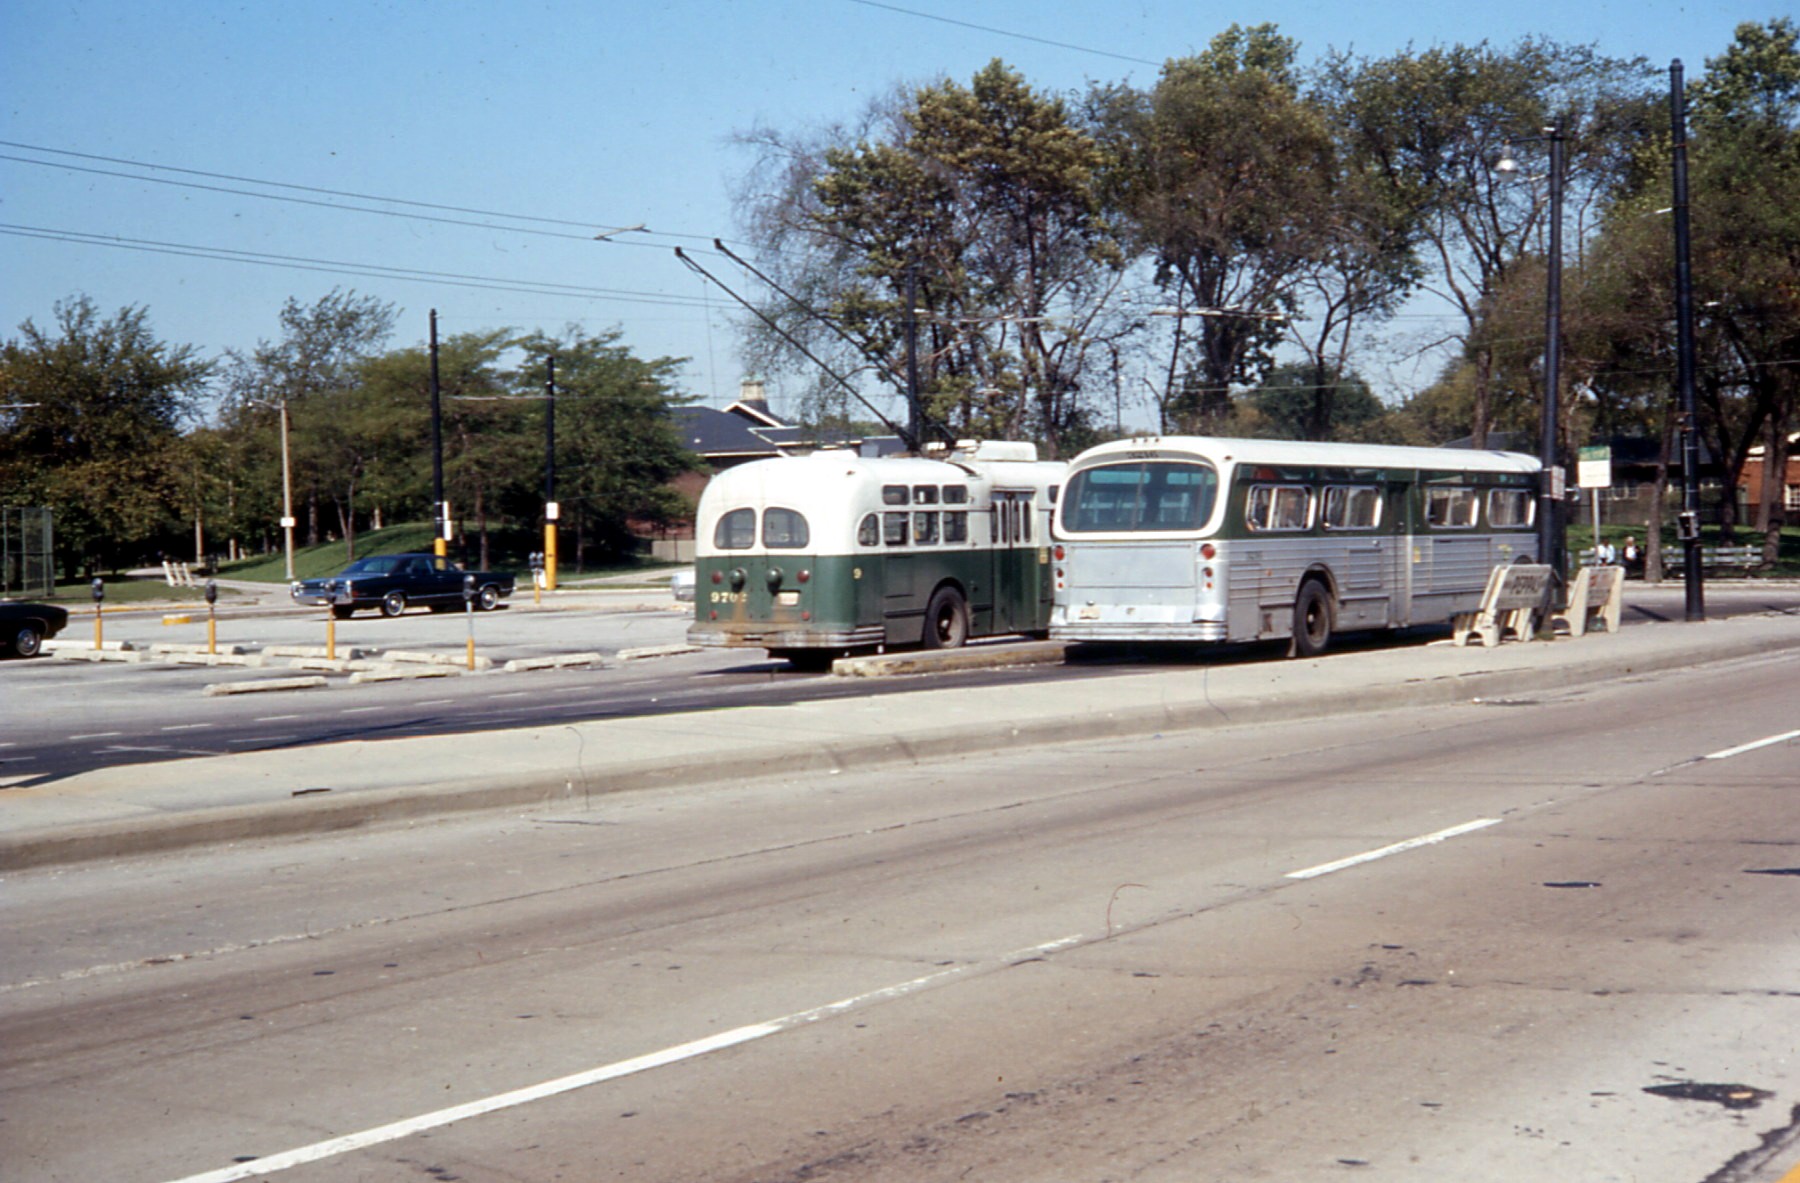 two buses parked on the side of the road in front of cars